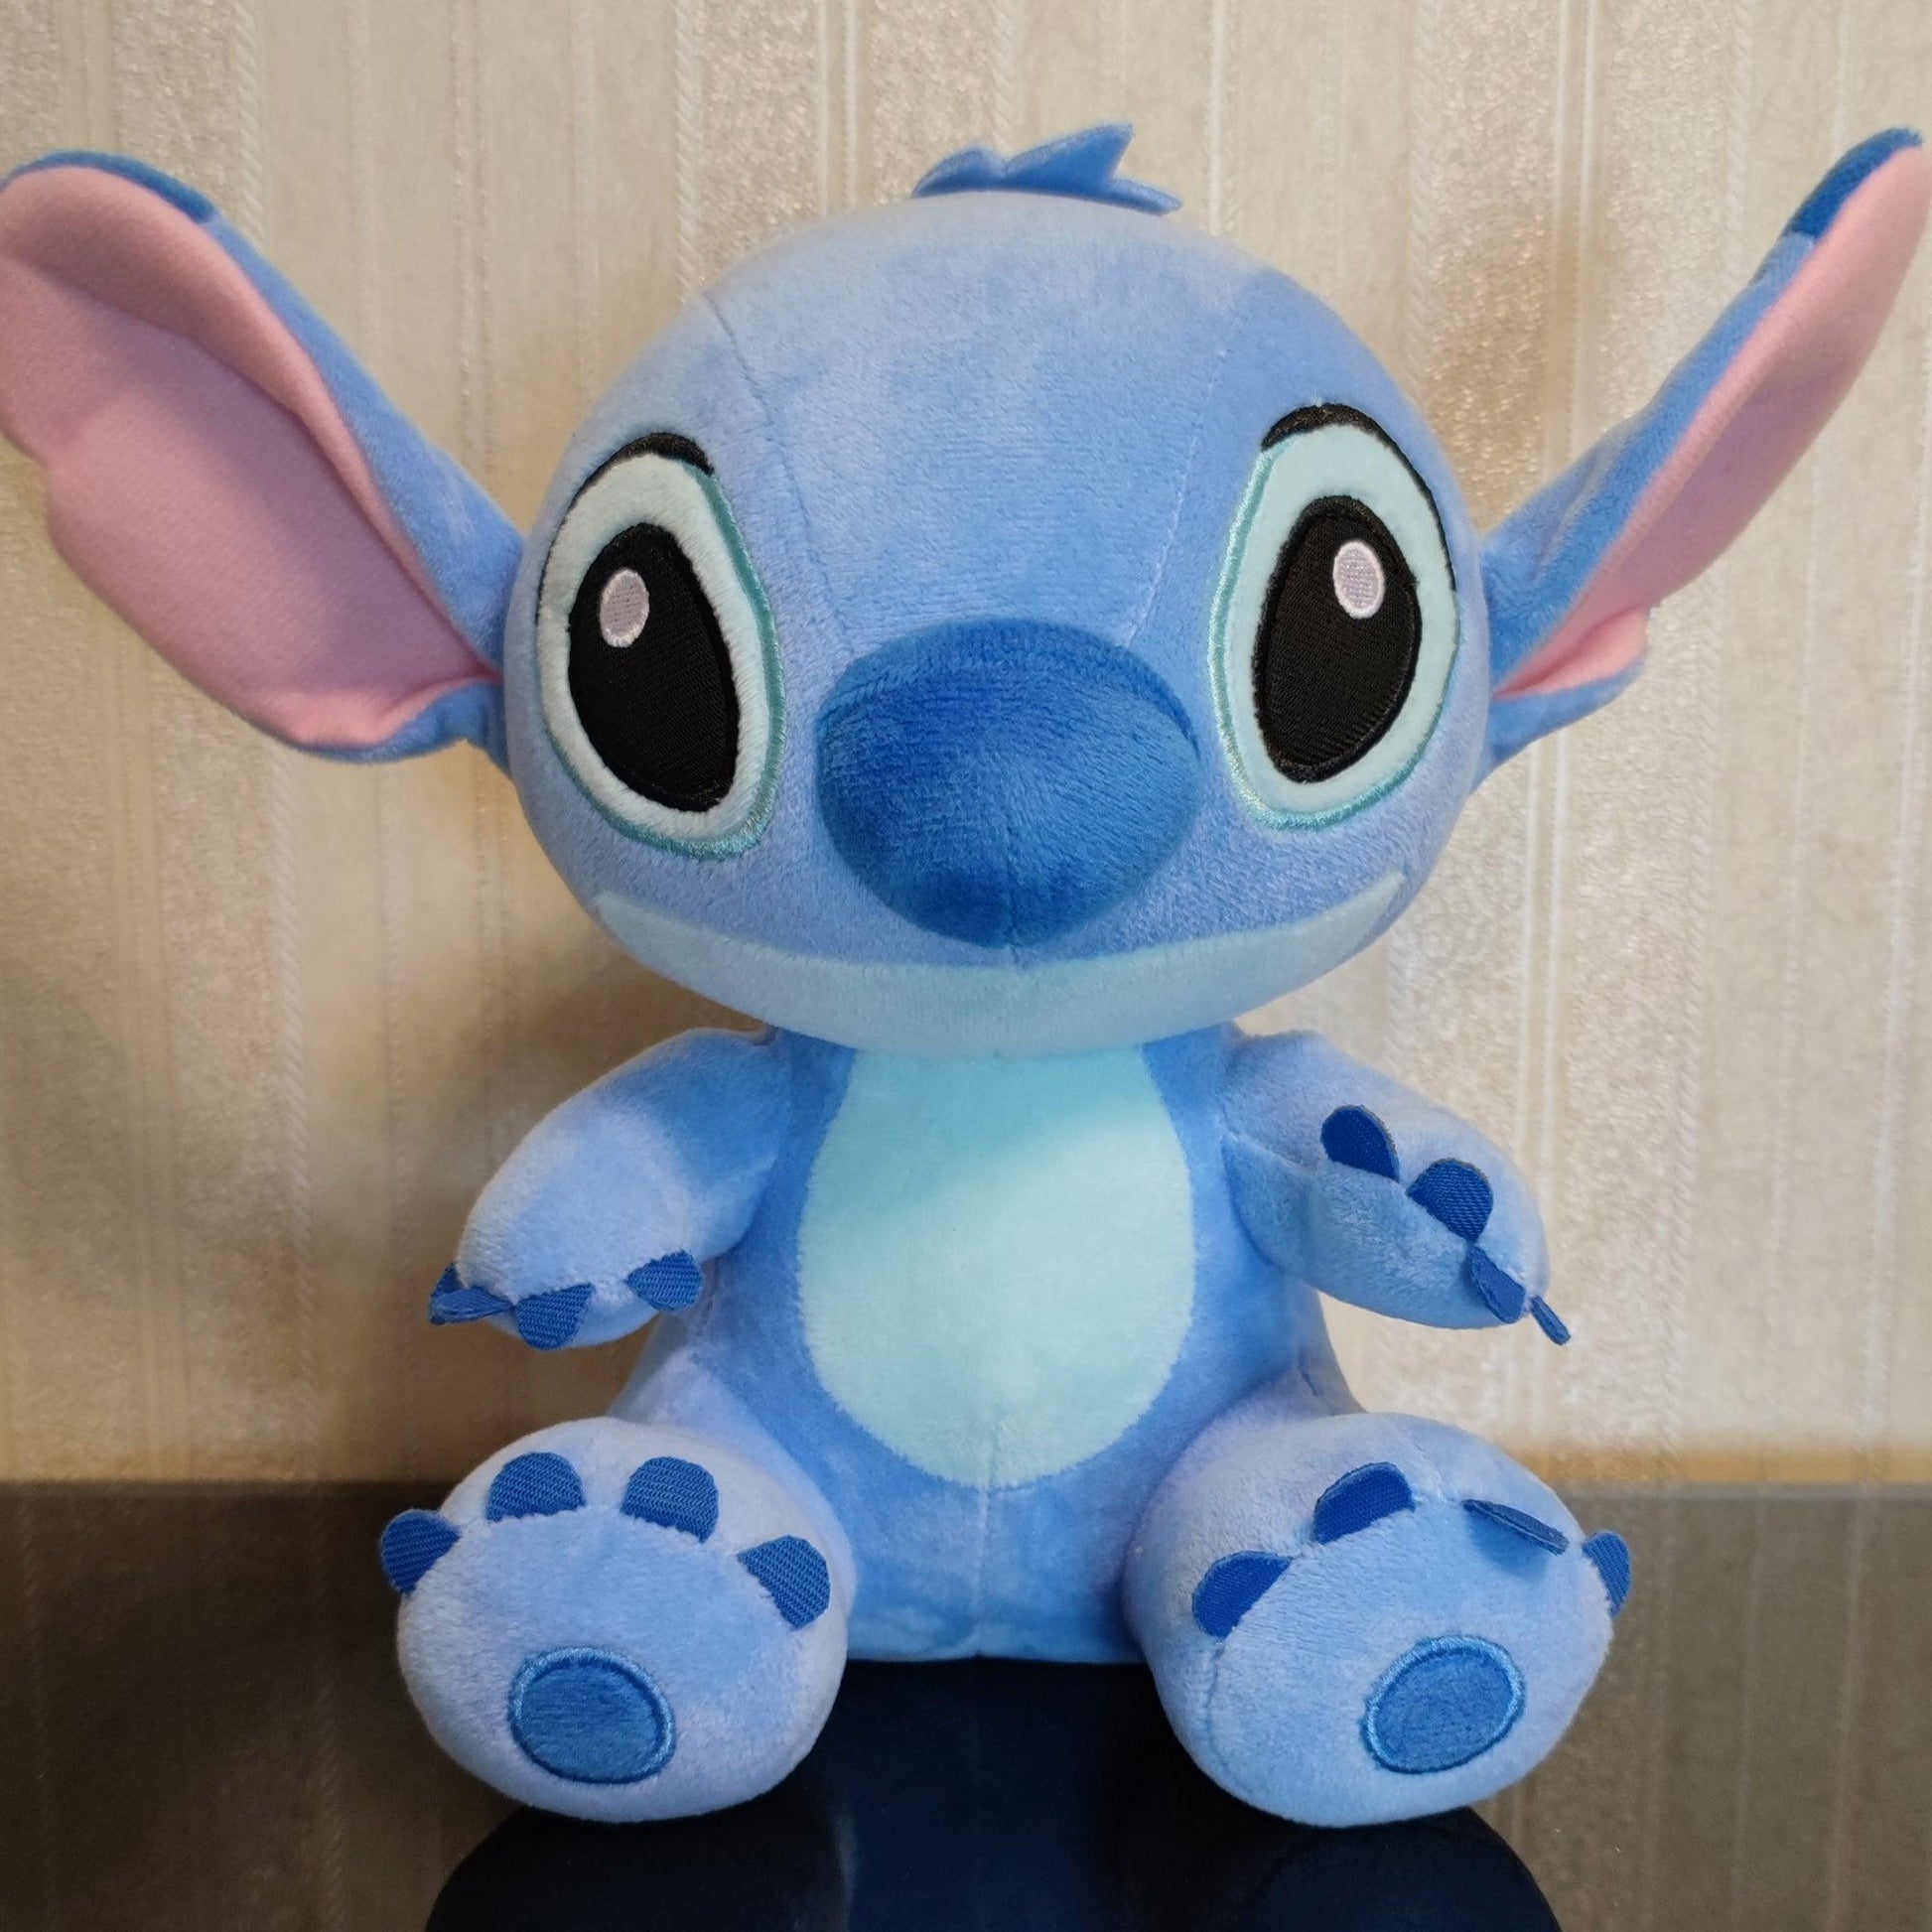 Disney Lilo Doll in Playful Blue Color